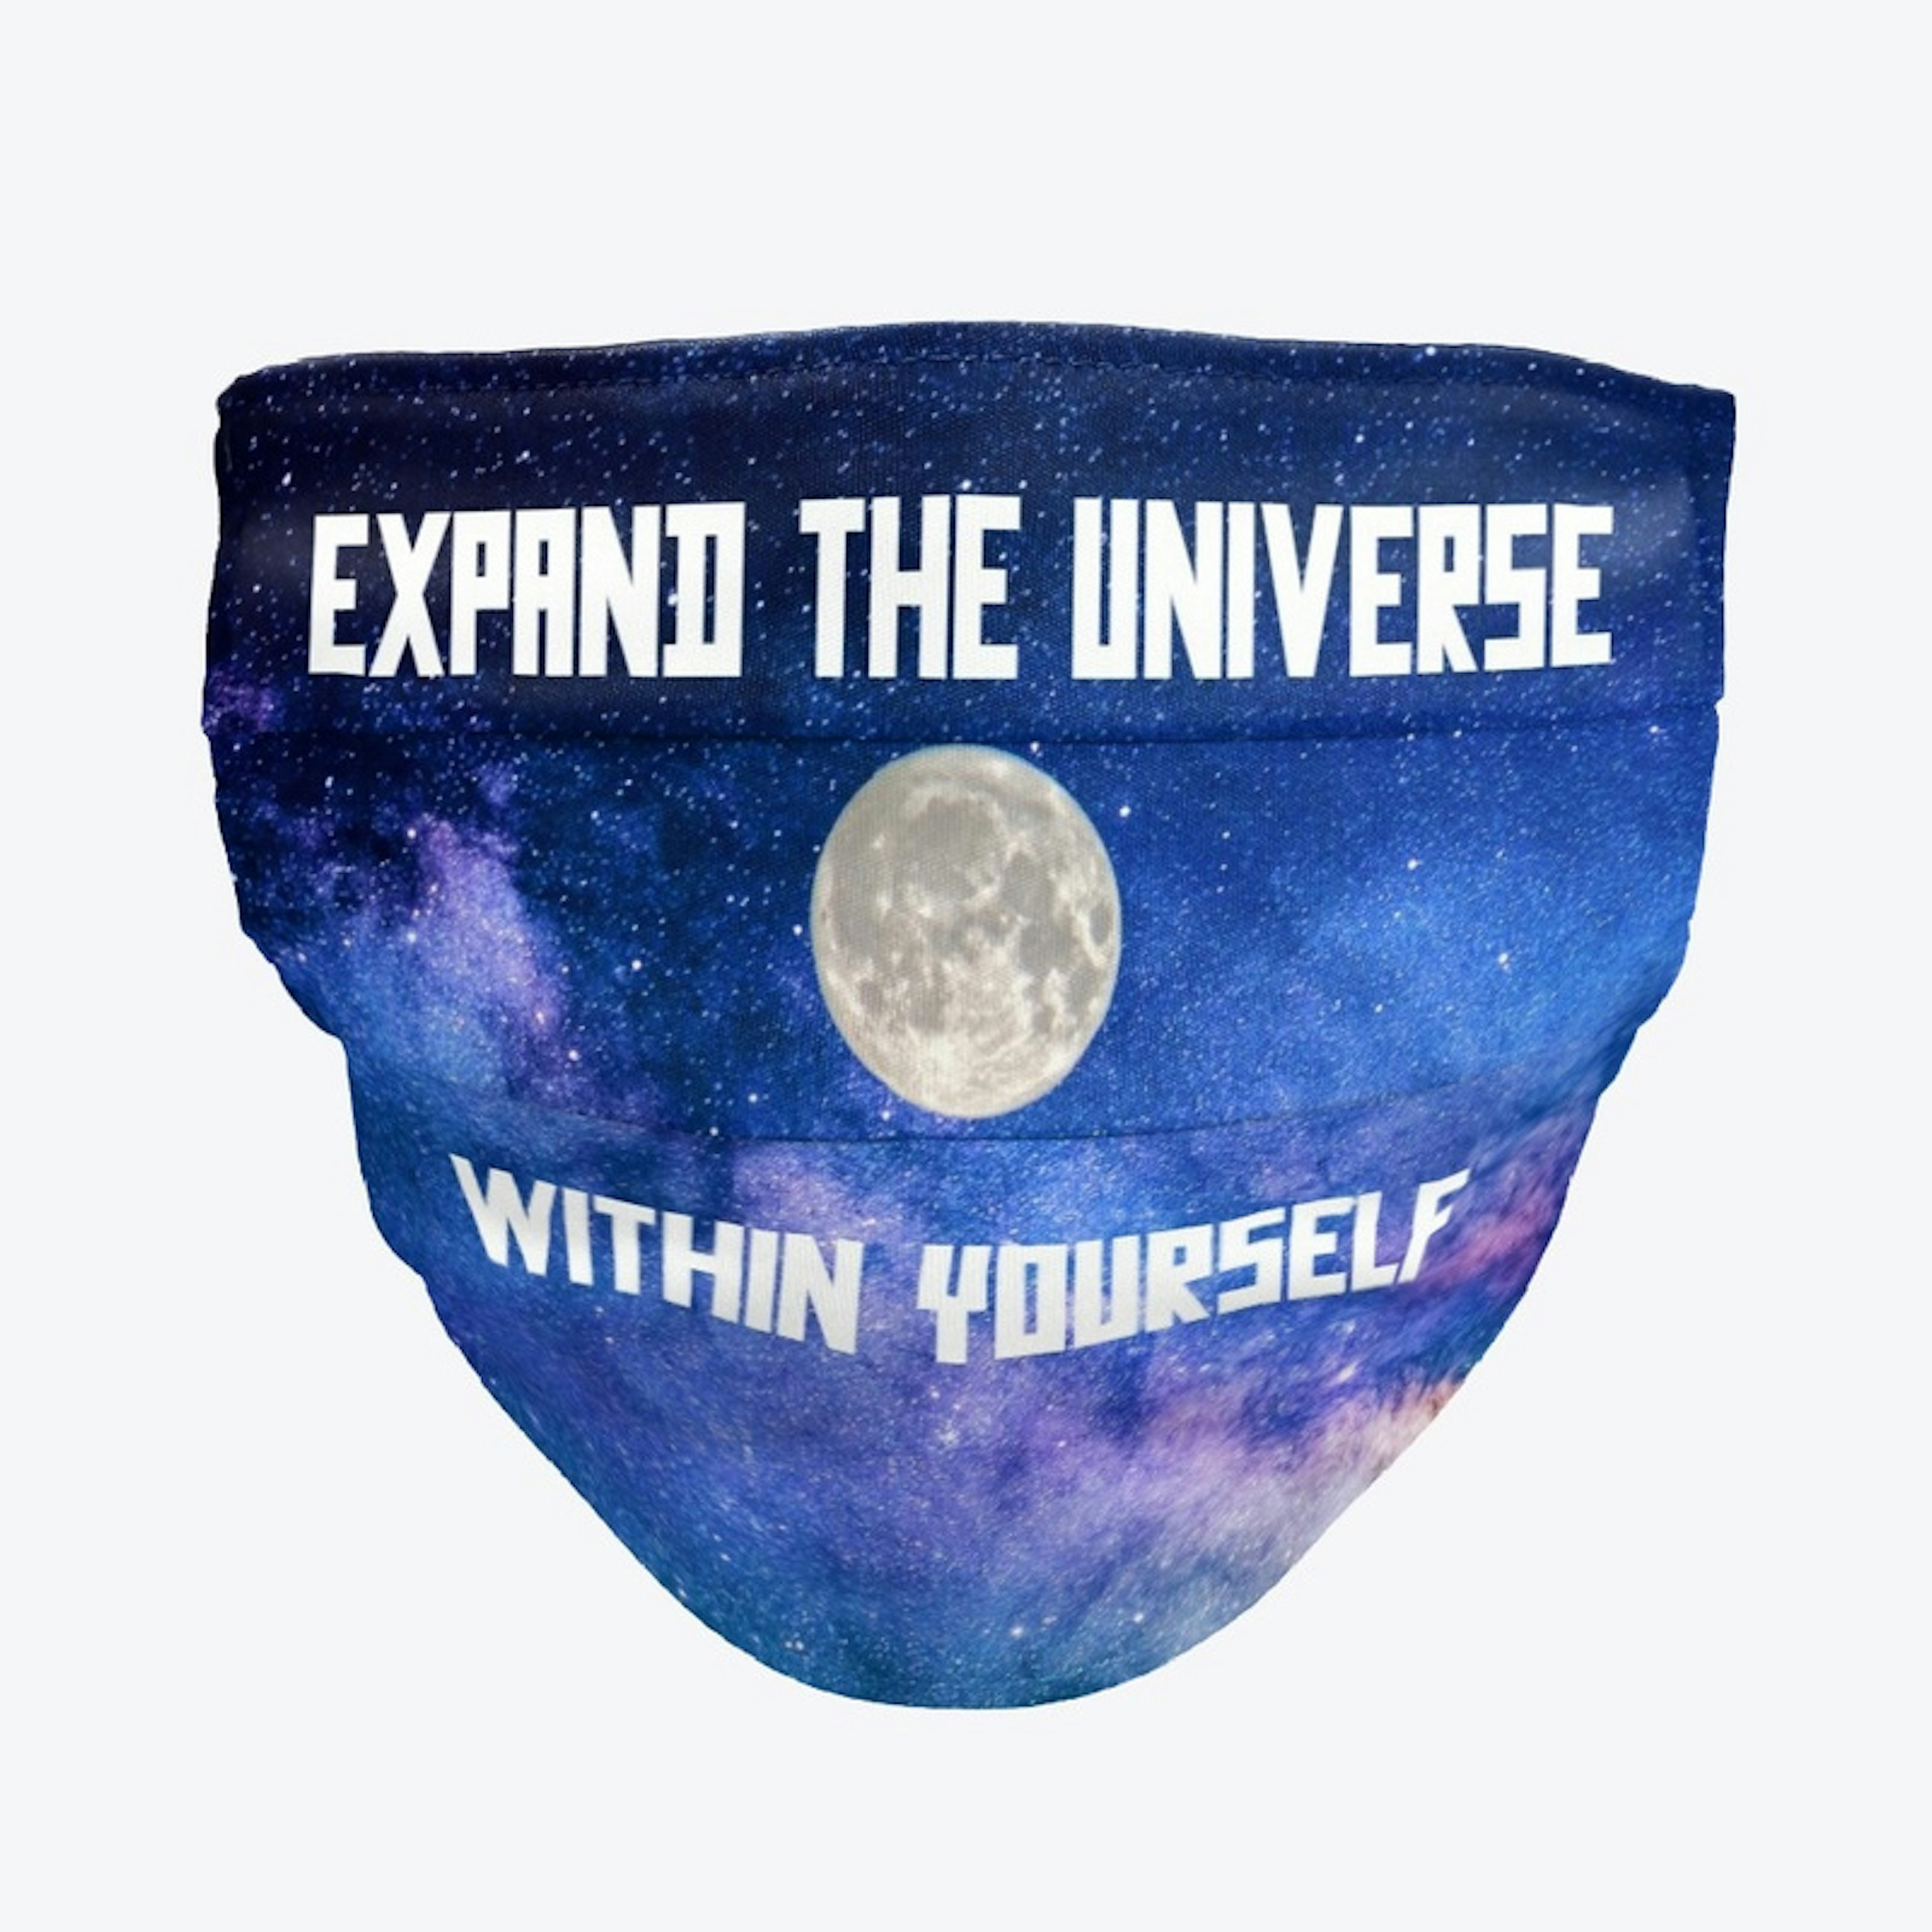 Expand The Universe Within Yourself New